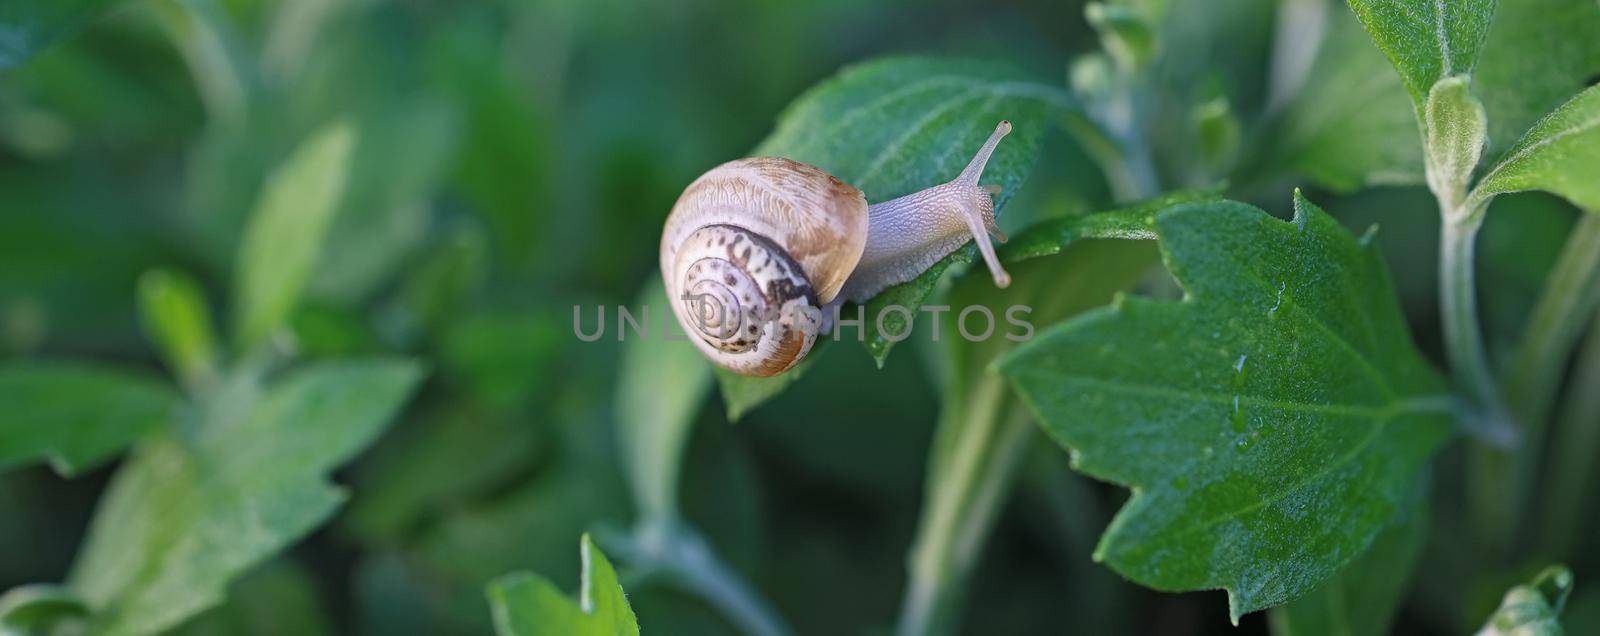 small snail in a shell crawls on the grass, a summer day in the garden. close up of small snail on plant leaf in garden outdoor, mollusk macro by Proxima13